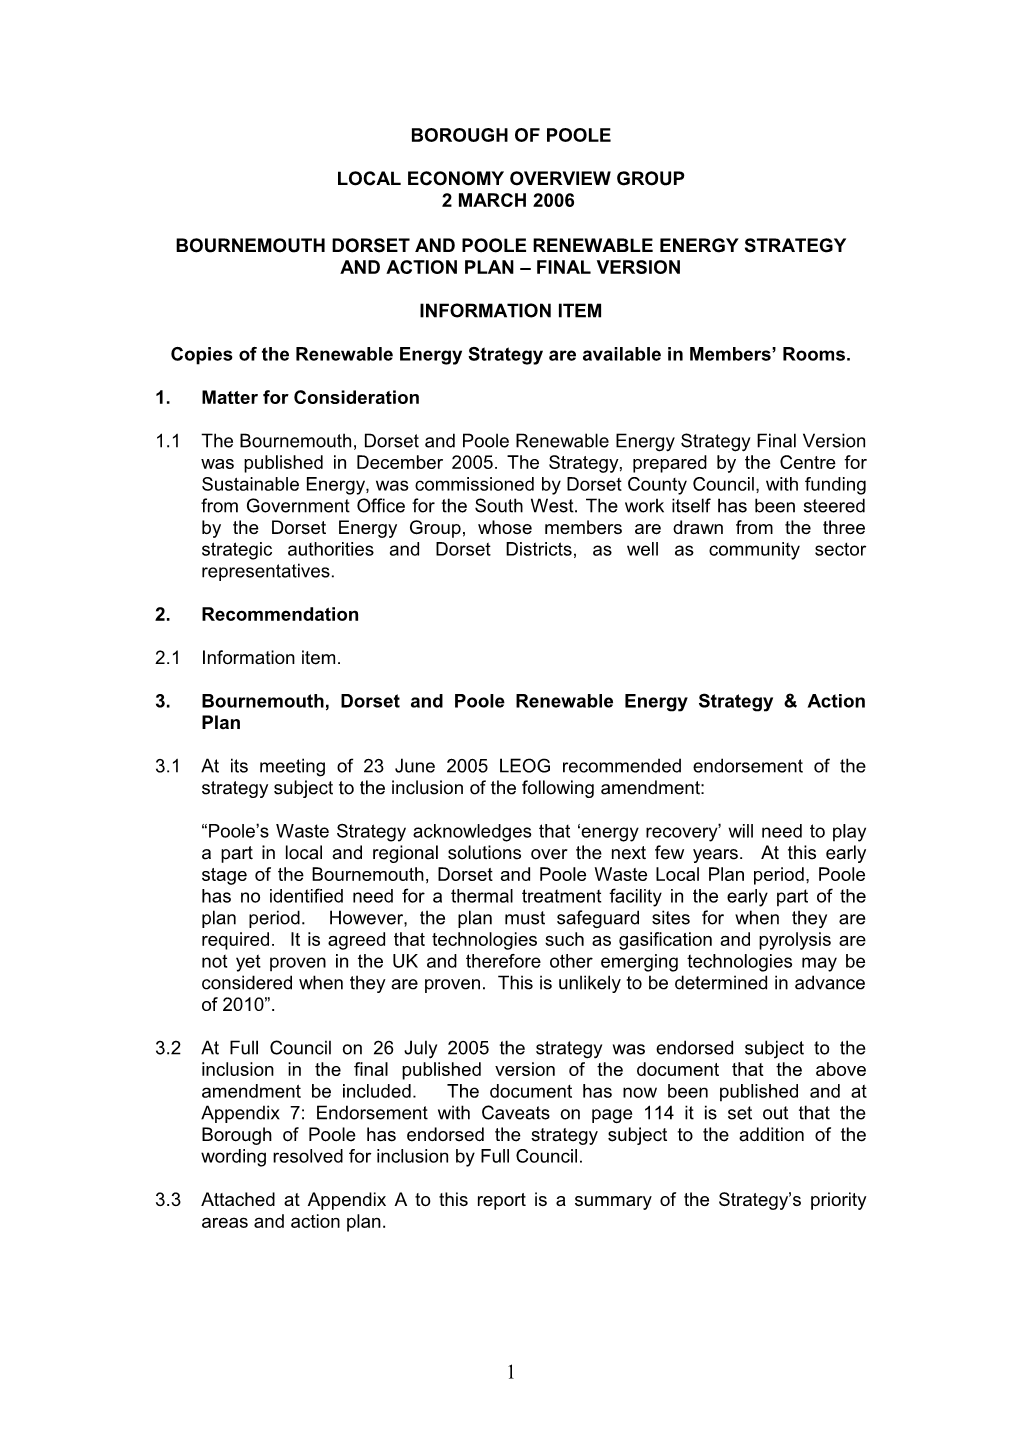 Bournemouth Dorset and Poole Renewable Energy Strategy and Action Plan Final Version